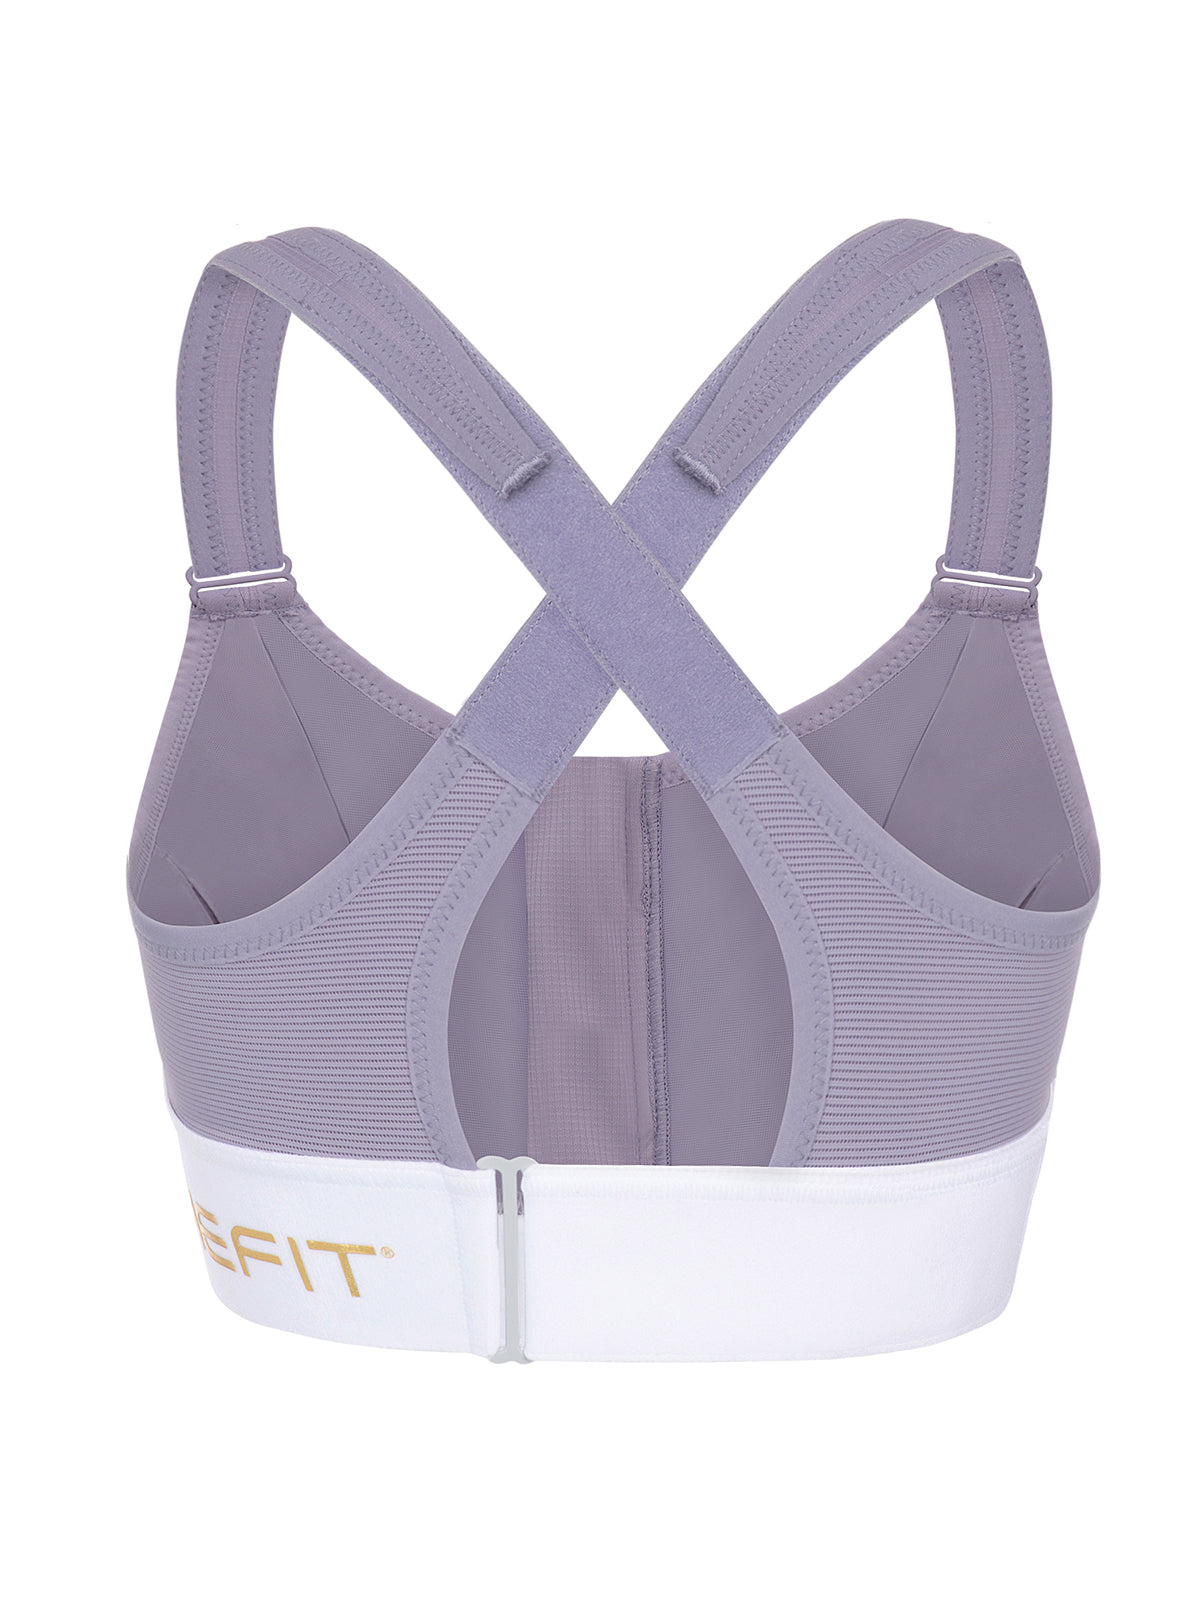 Chinese Laundry Comfort Straps Bras for Women